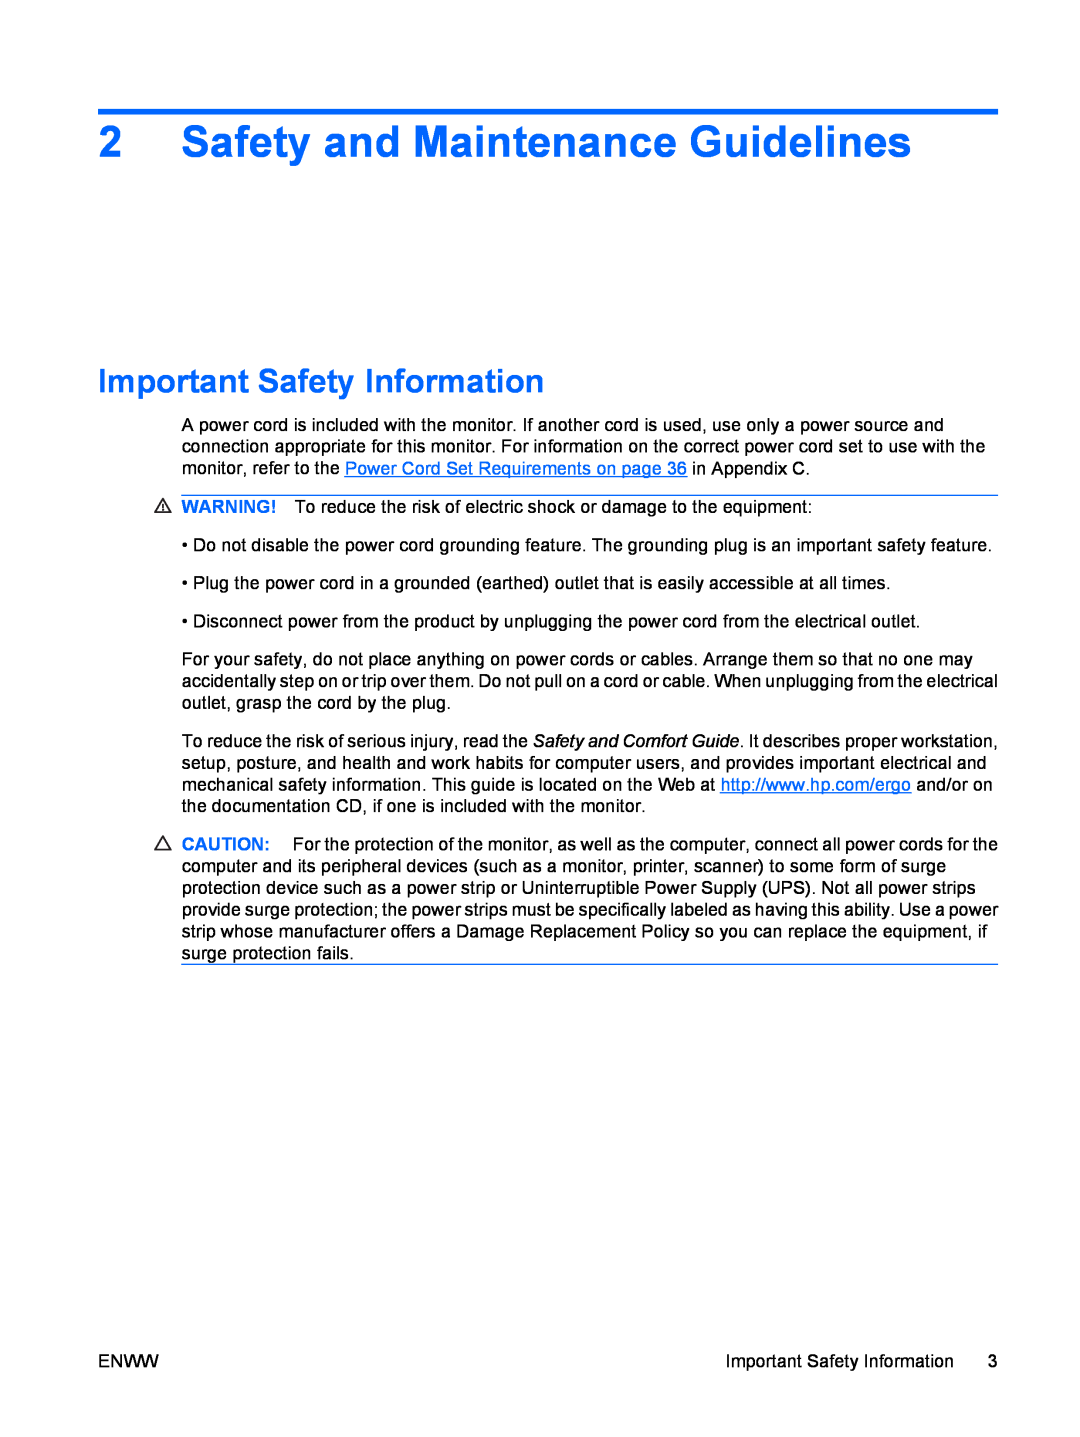 HP LE2201w, LE1901wm manual Safety and Maintenance Guidelines, Important Safety Information 